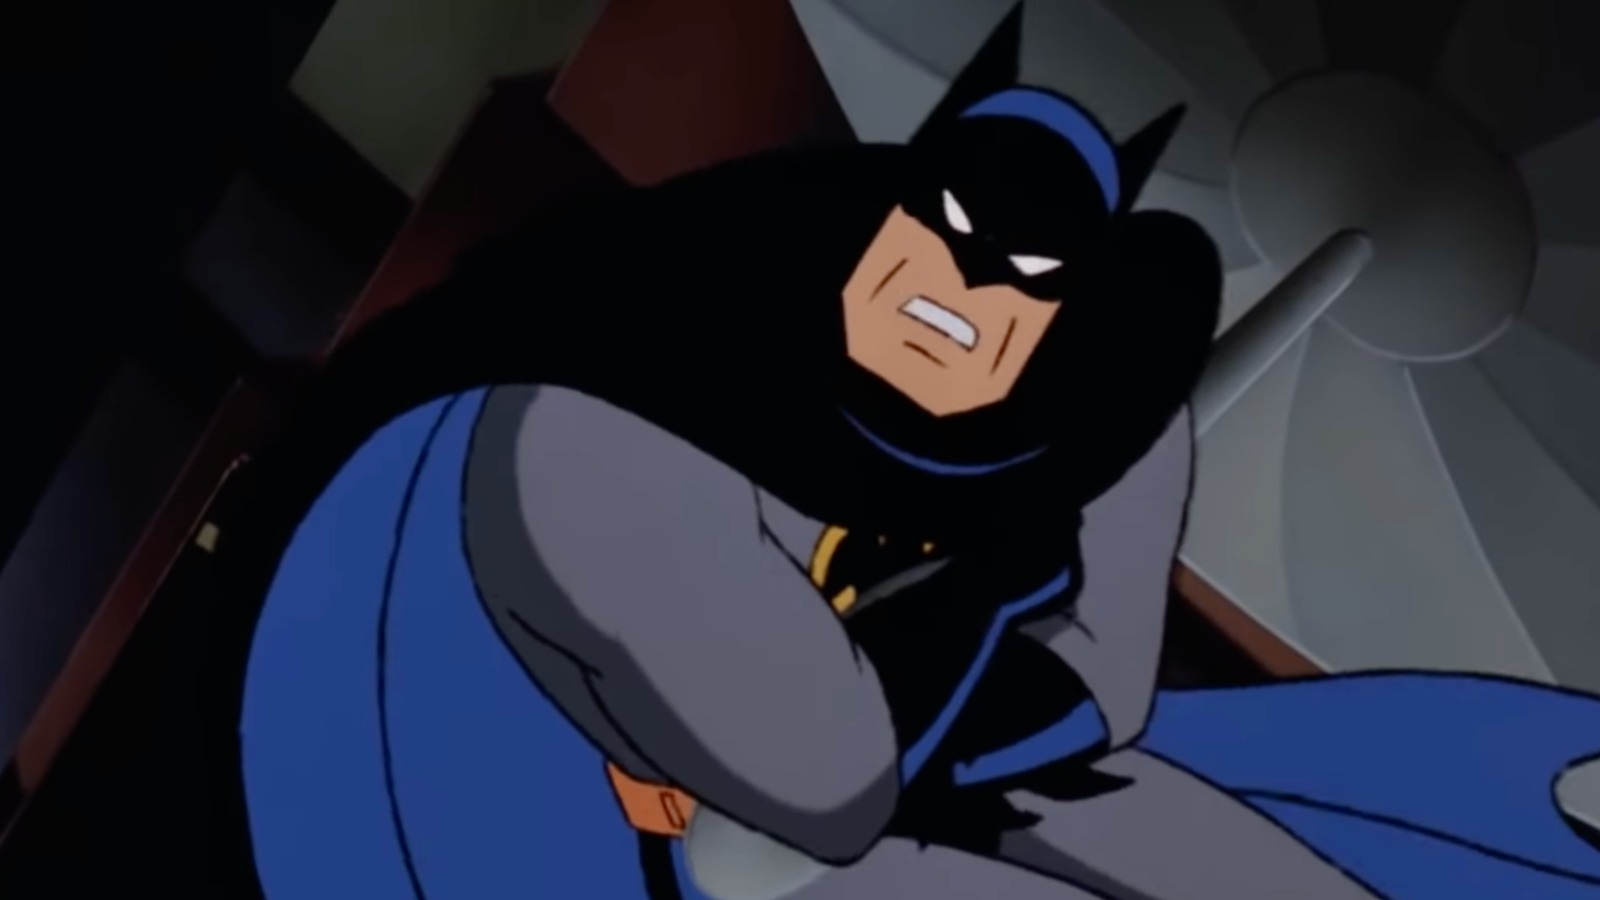 Kevin Conroy Channeled His Own Life Into One Of Batman's Most Famous Lines